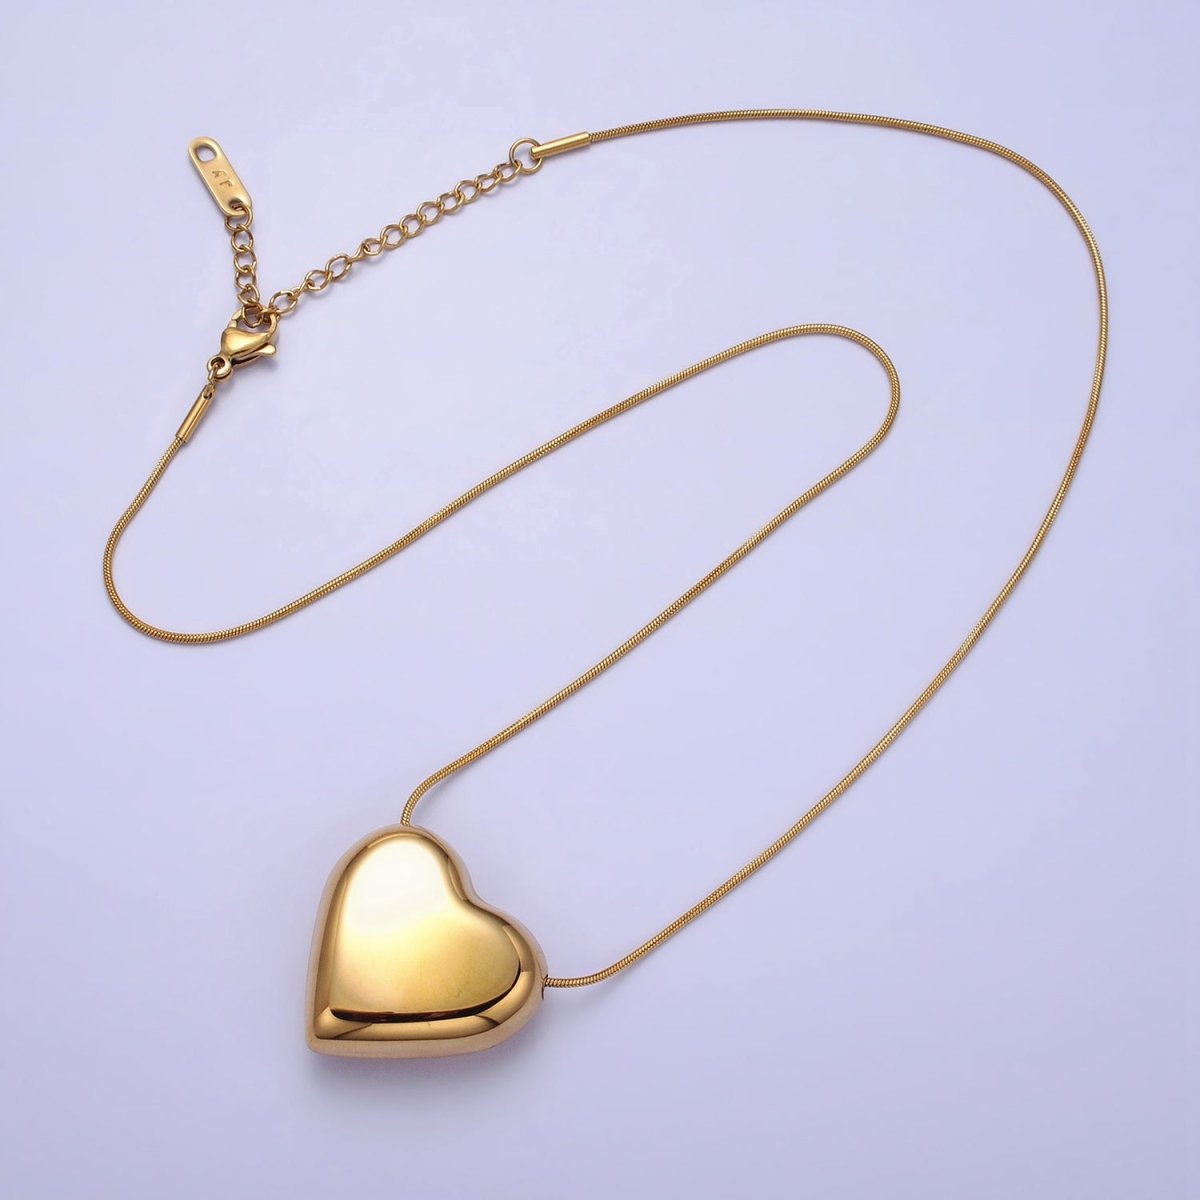 OS Clearance Pricing BLOWOUT Stainless Steel Gold Valentine Heart Slider Bead Omega 16 Inch Choker Chain Necklace | WA-1631 - DLUXCA